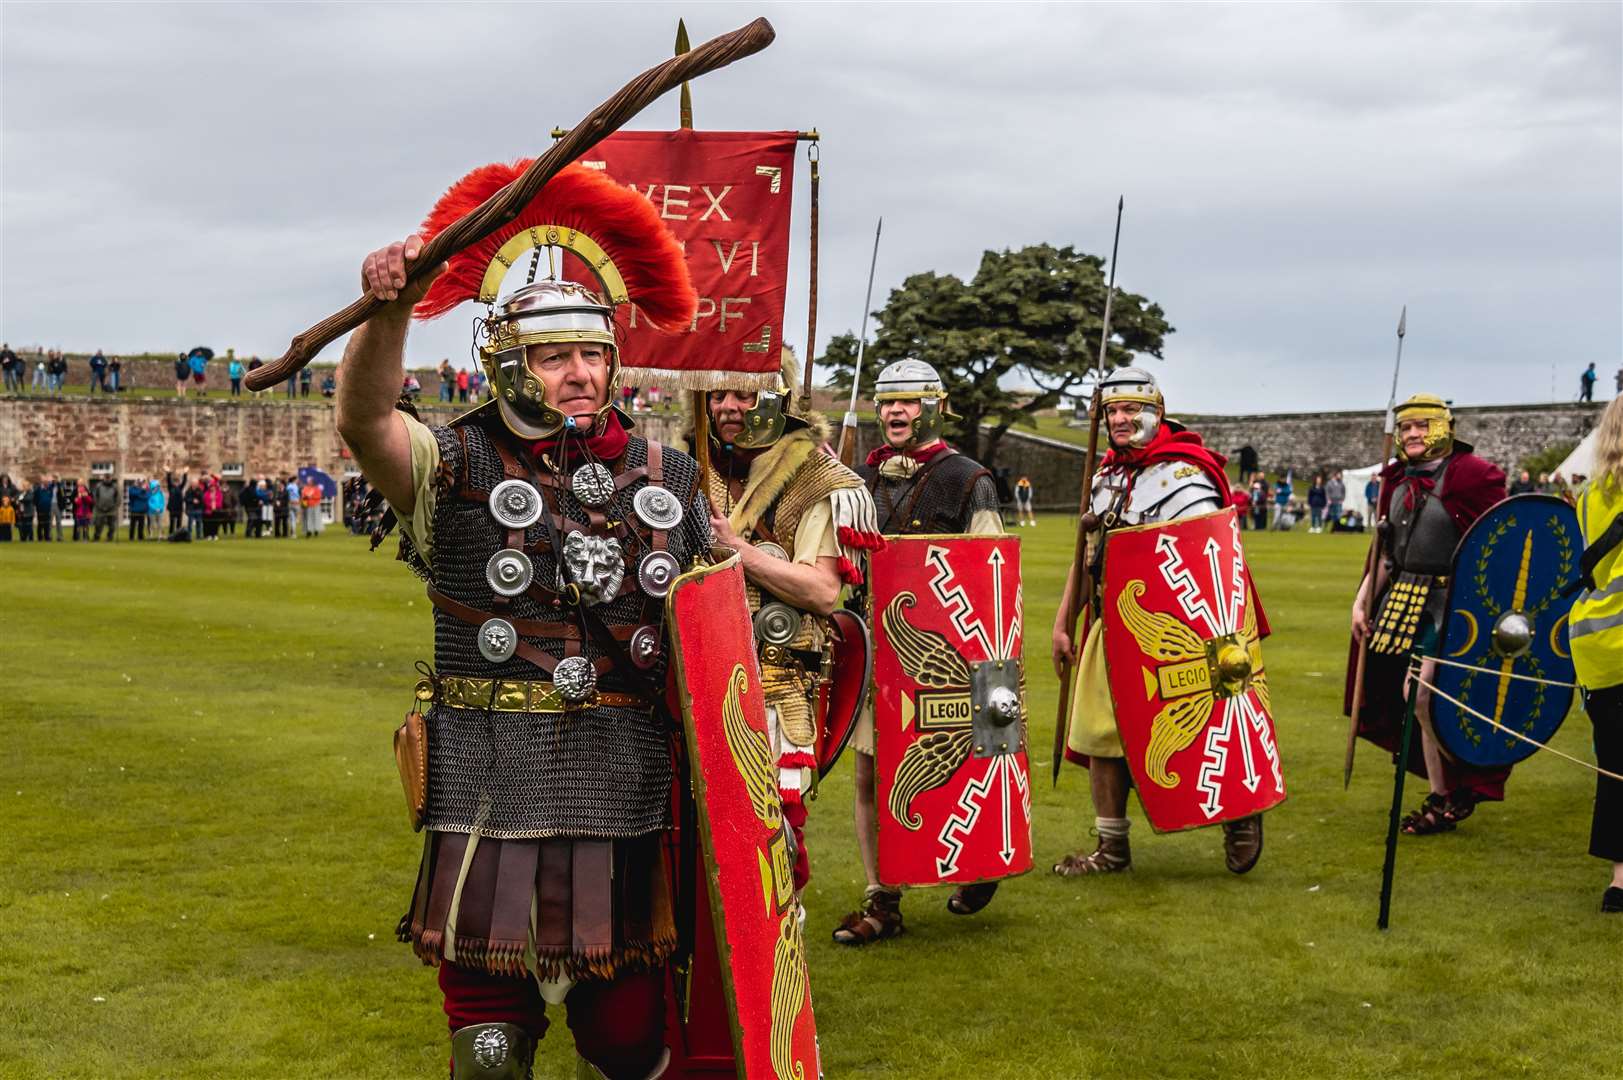 This weekend, the Celebration of the Centuries spectacular makes its return to Fort George.